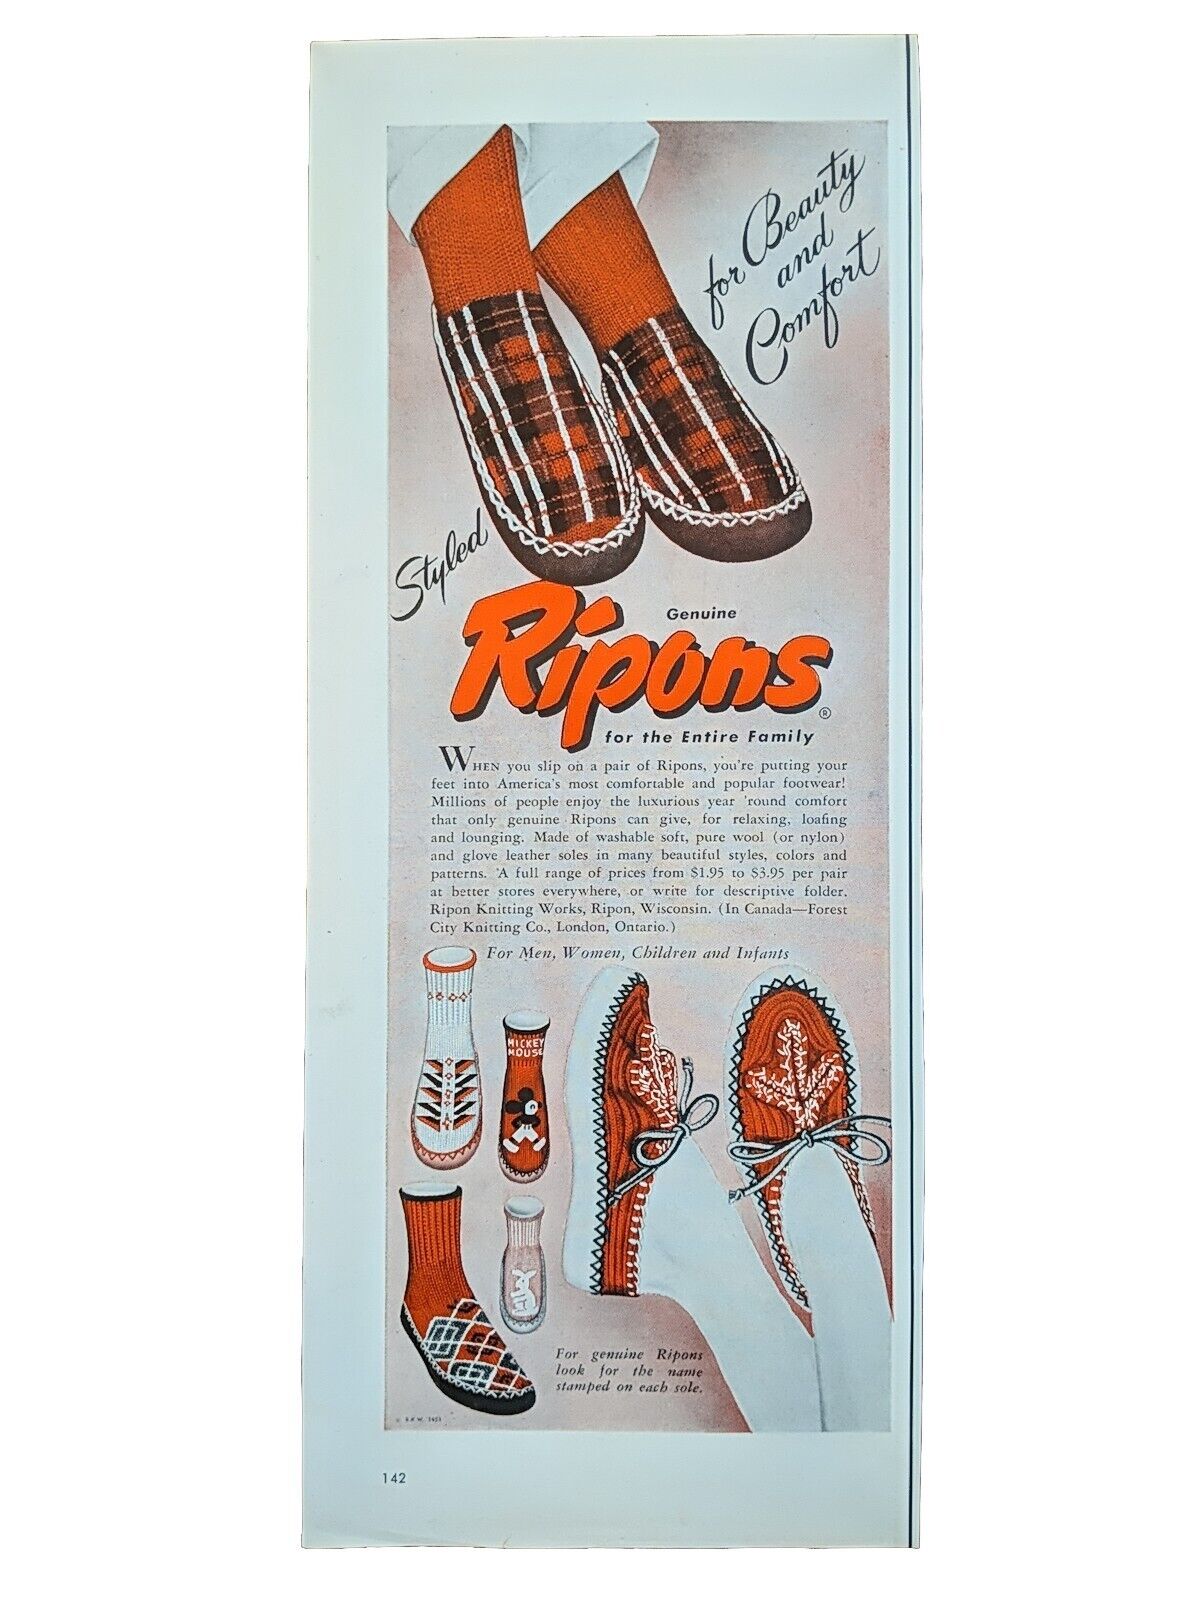 1951 Stylish Ripons For The Entire Family, Household Slip On Footwear 